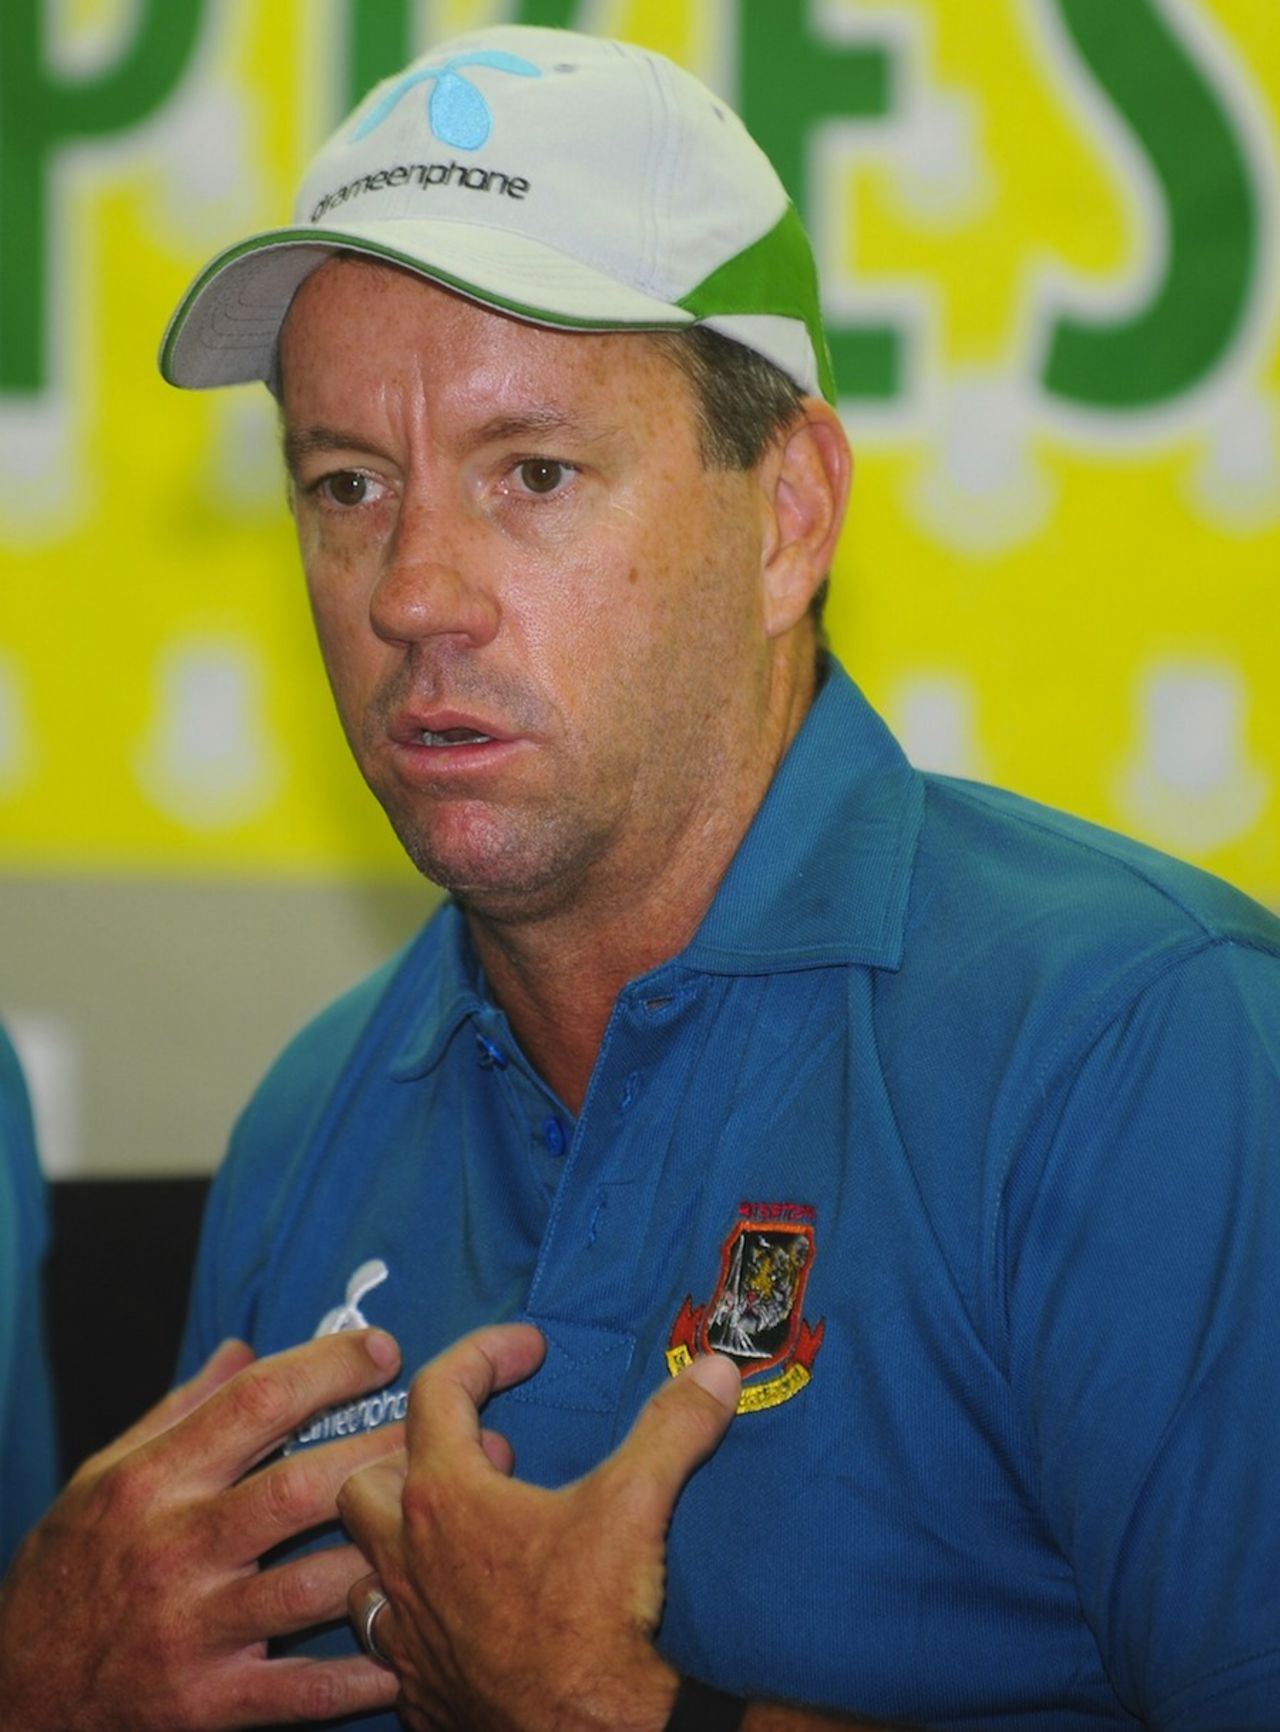 Stuart Law, Bangladesh's new coach, speaks to reporters, Mirpur, July 18, 2011